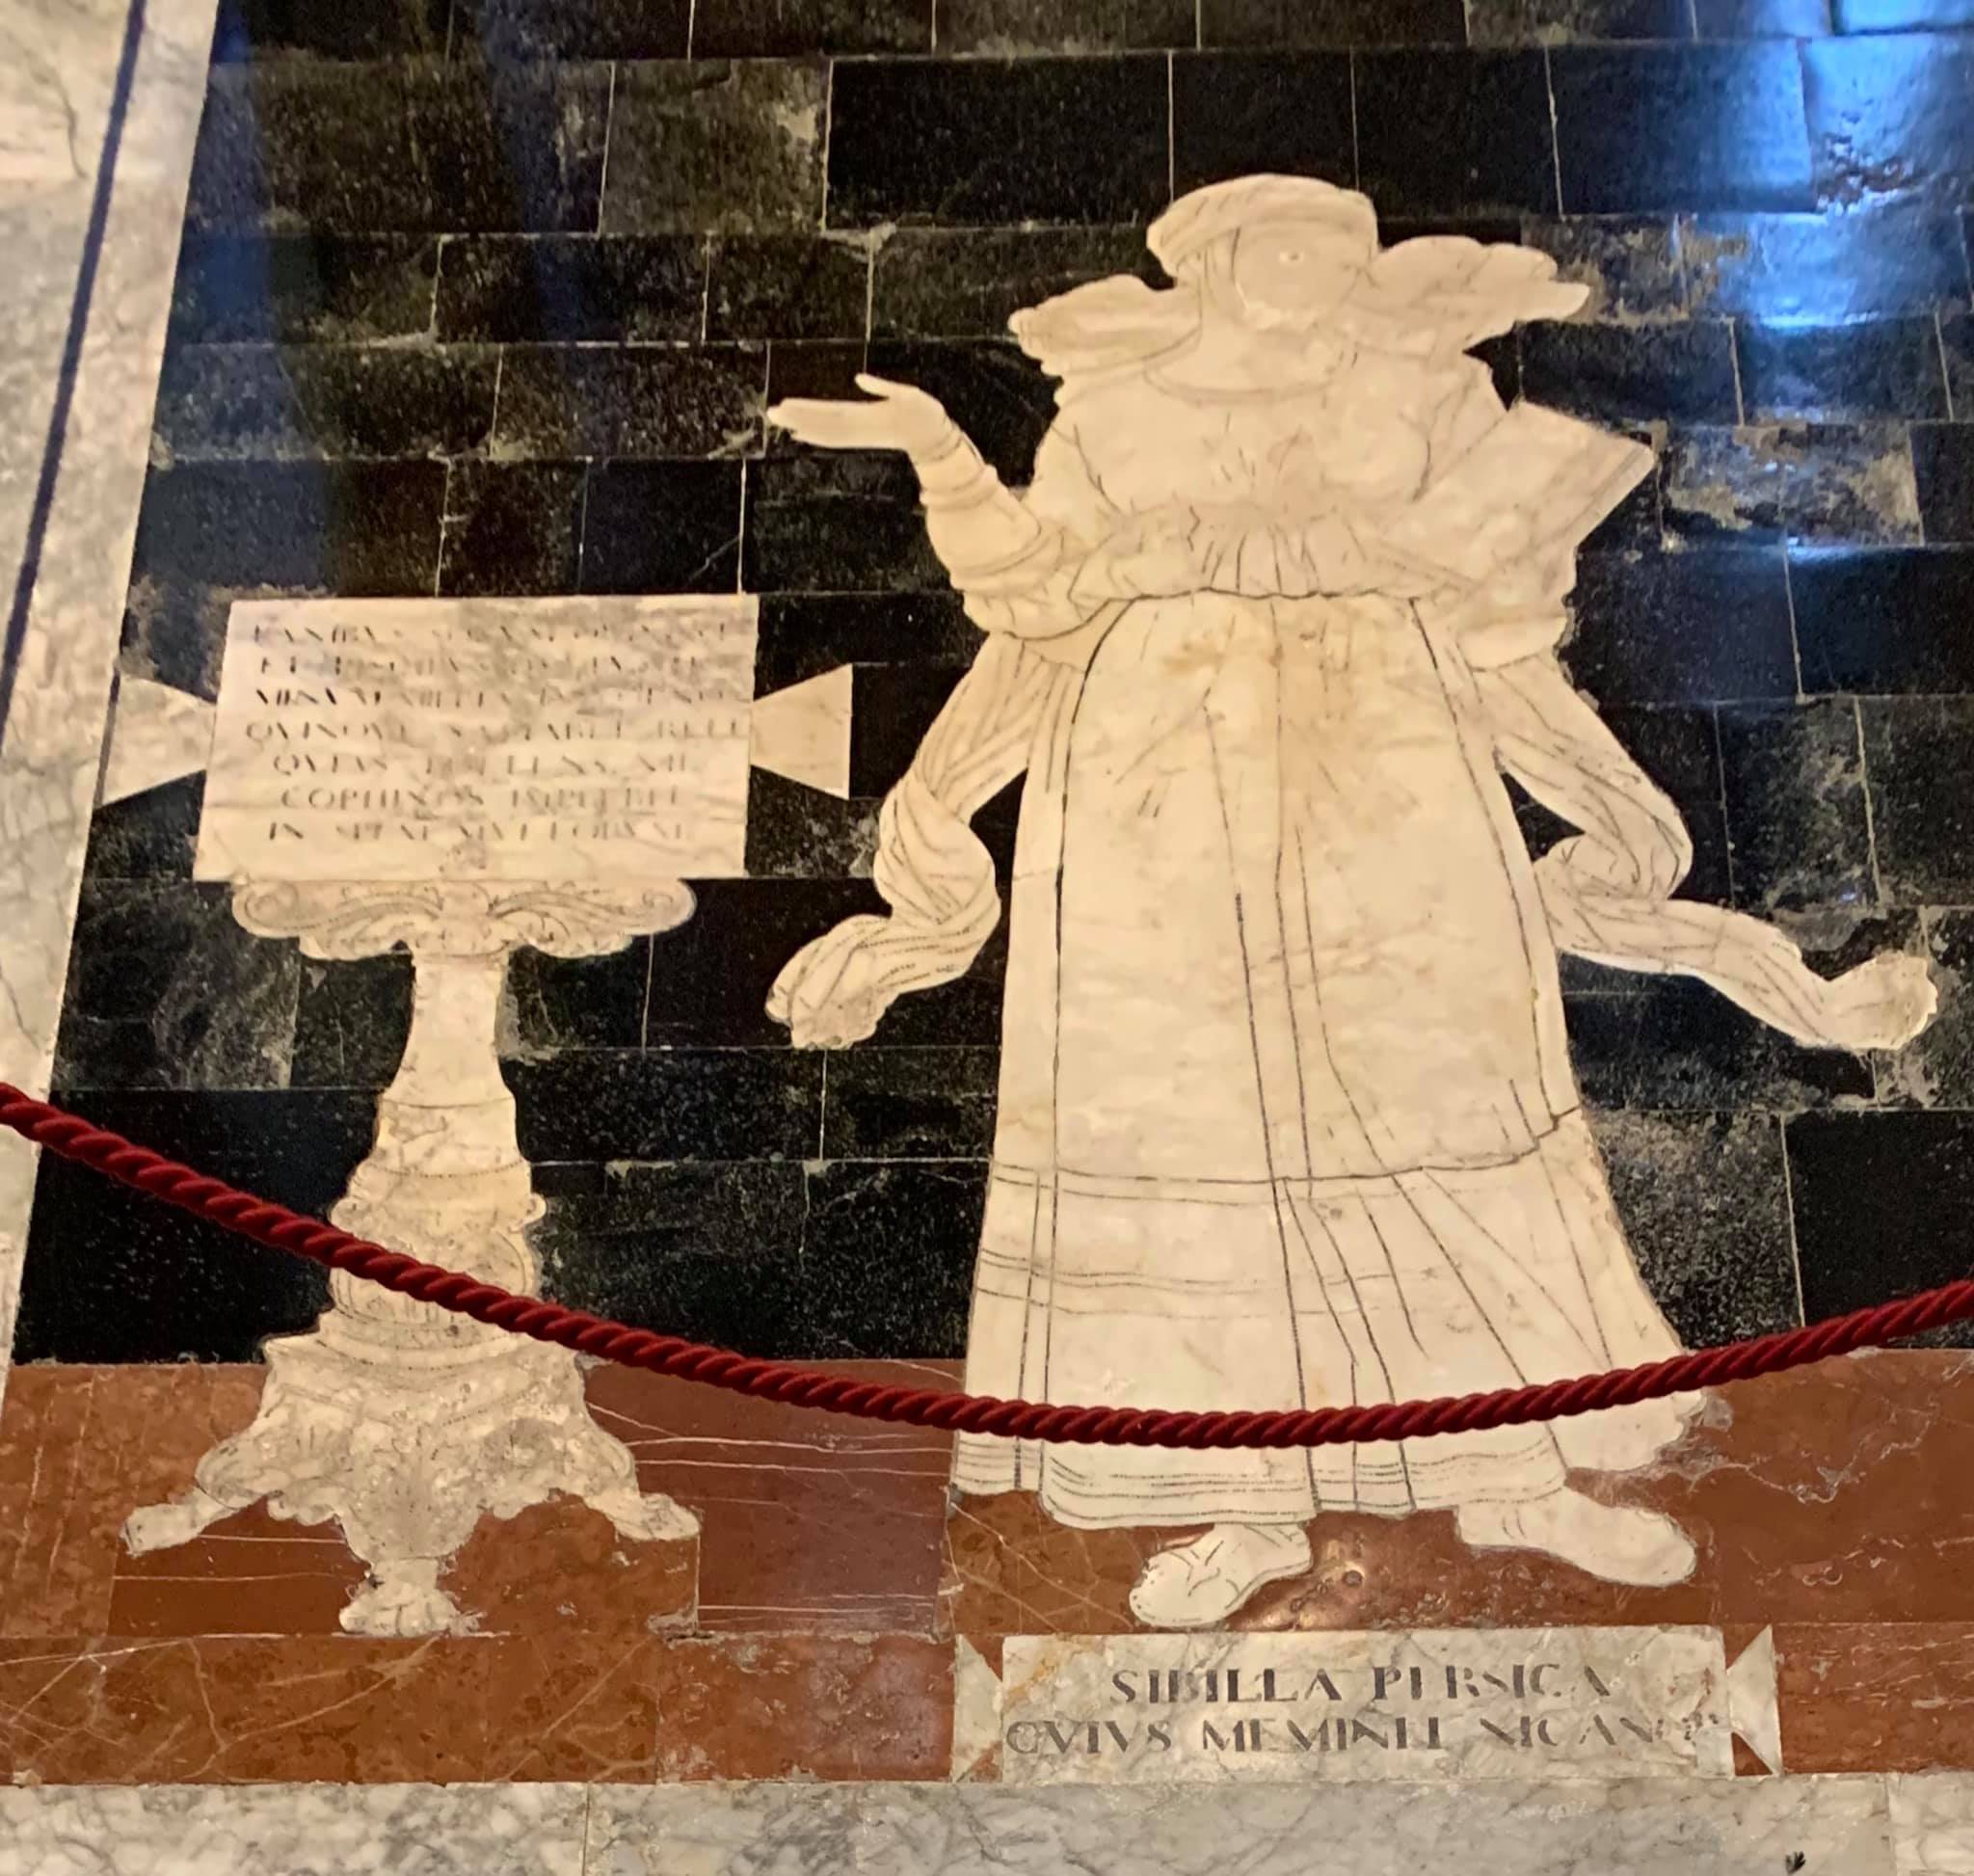 New Liturgical Movement: The The of Cathedral Siena 4): Decorative Nave (Part of the Pavement